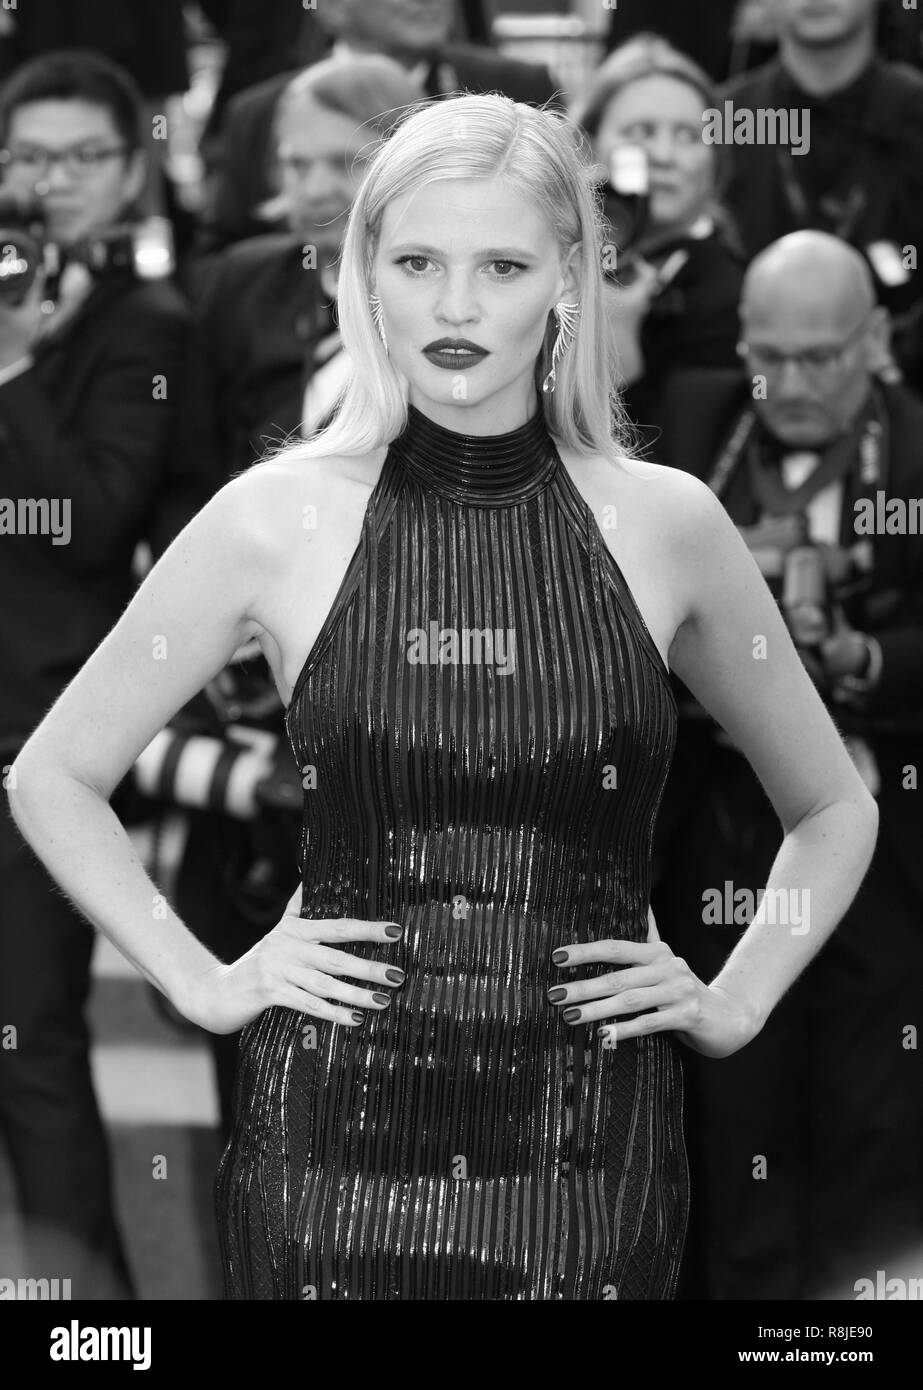 Lara Stone attends The Beguiled screening during the 70th annual Cannes Film Festival at Palais des Festivals on May 24, 2017 in Cannes, France. Stock Photo